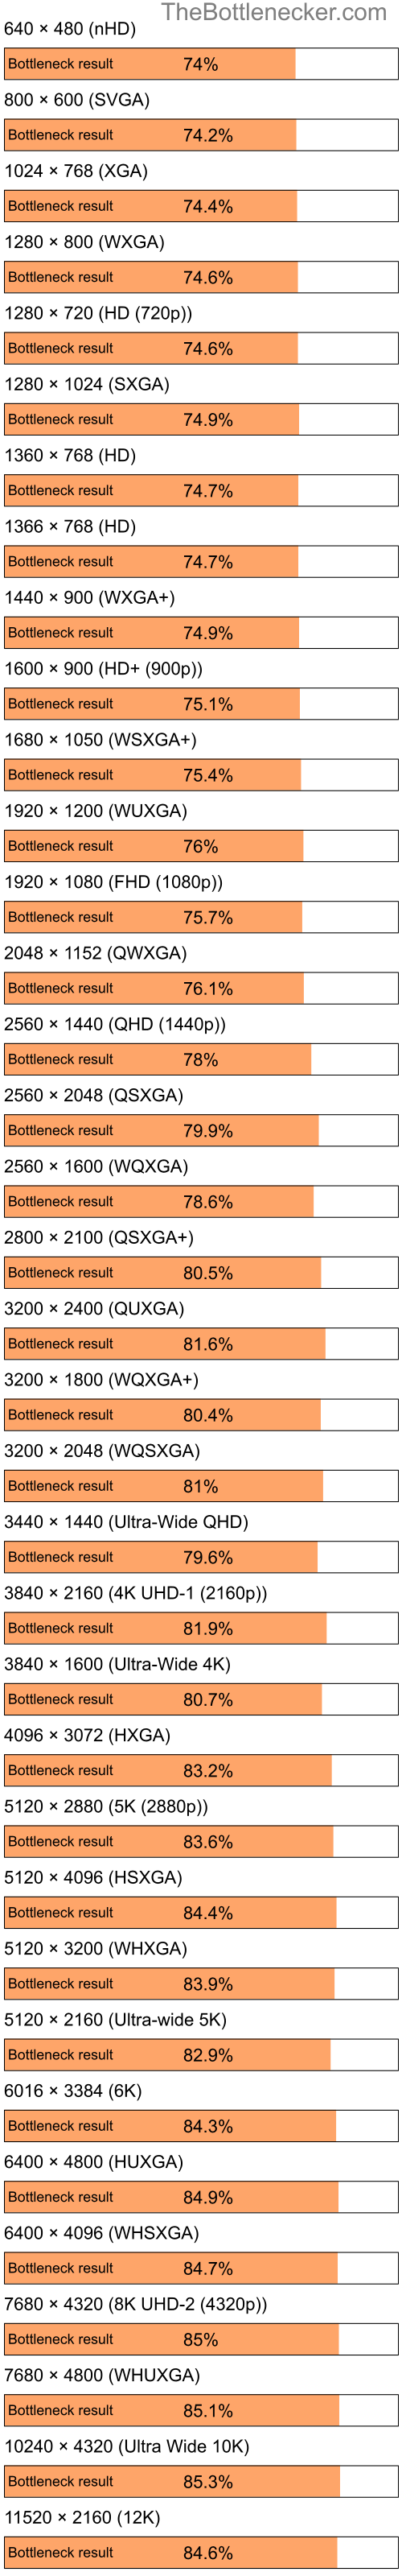 Bottleneck results by resolution for Intel Pentium 4 and AMD Mobility Radeon X2300 in General Tasks